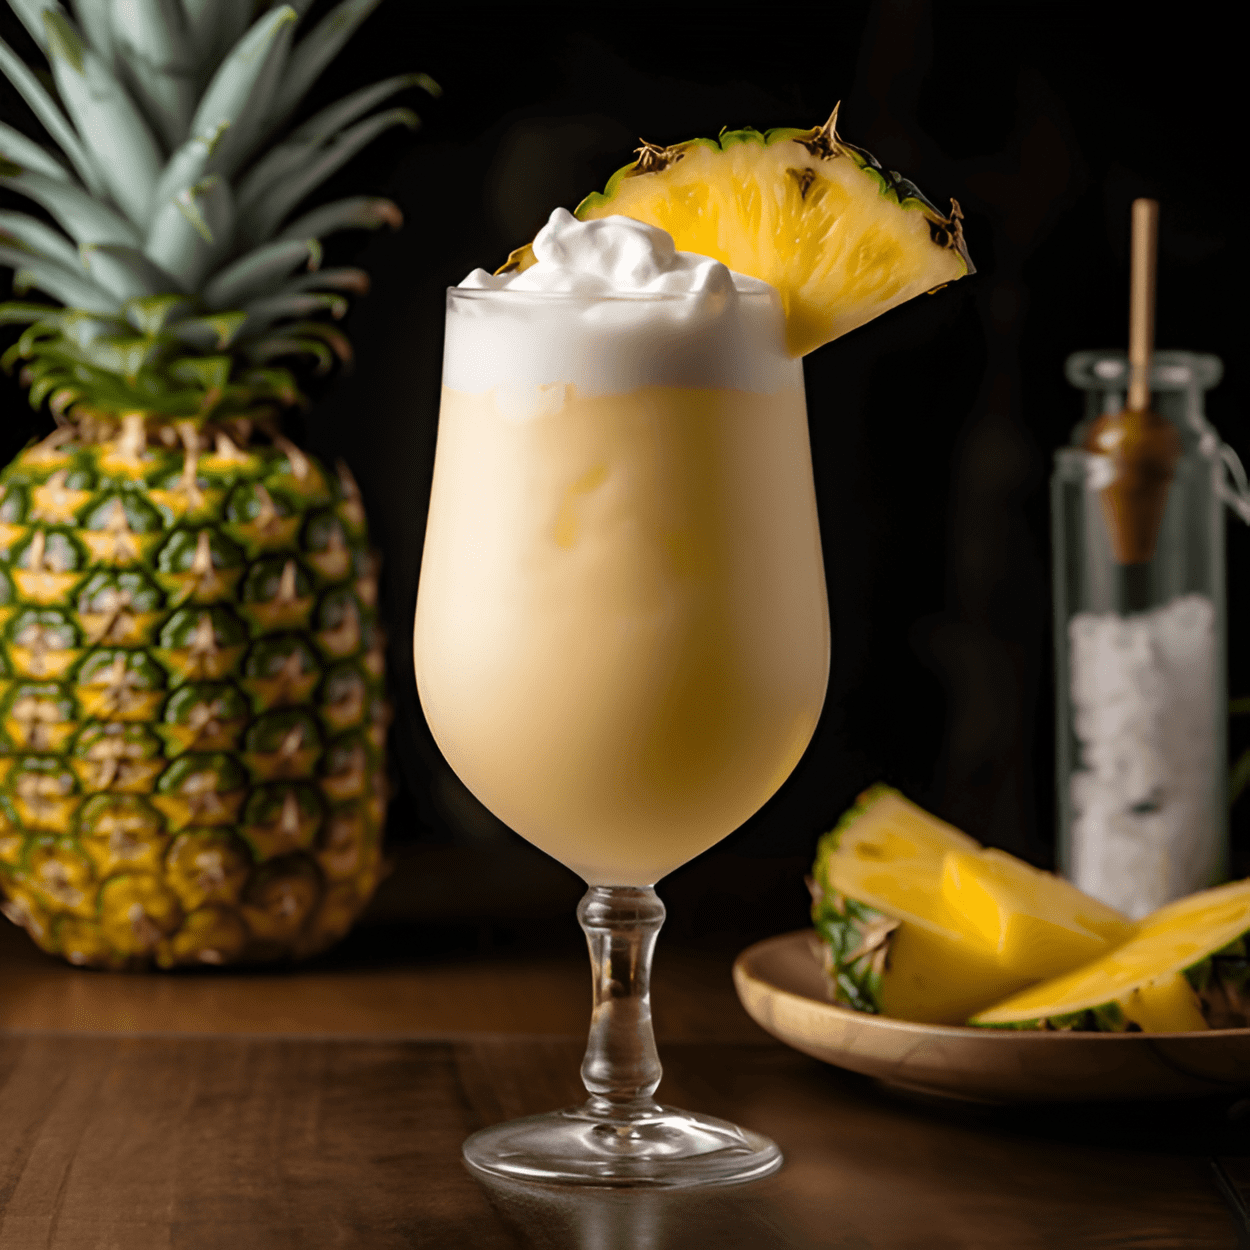 Hummingbird Cocktail Recipe - The Hummingbird cocktail is a delightful blend of sweet and creamy flavors. The banana liqueur adds a tropical sweetness, while the rum gives it a slight kick. The cream and pineapple juice balance out the sweetness, making it a smooth and refreshing drink.